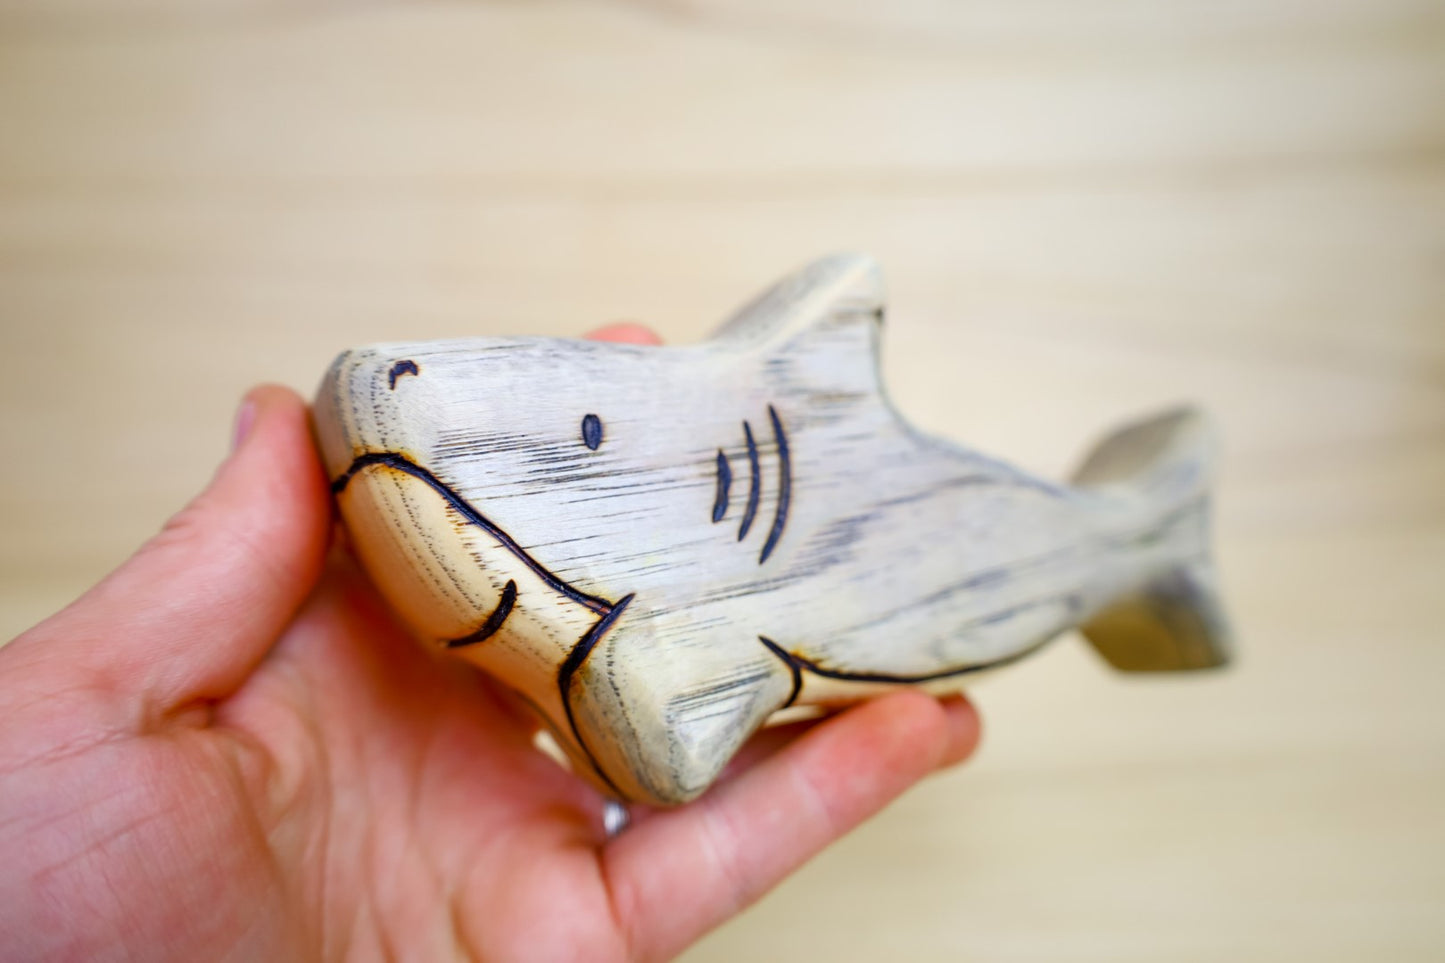 Wooden Great White Shark Toy